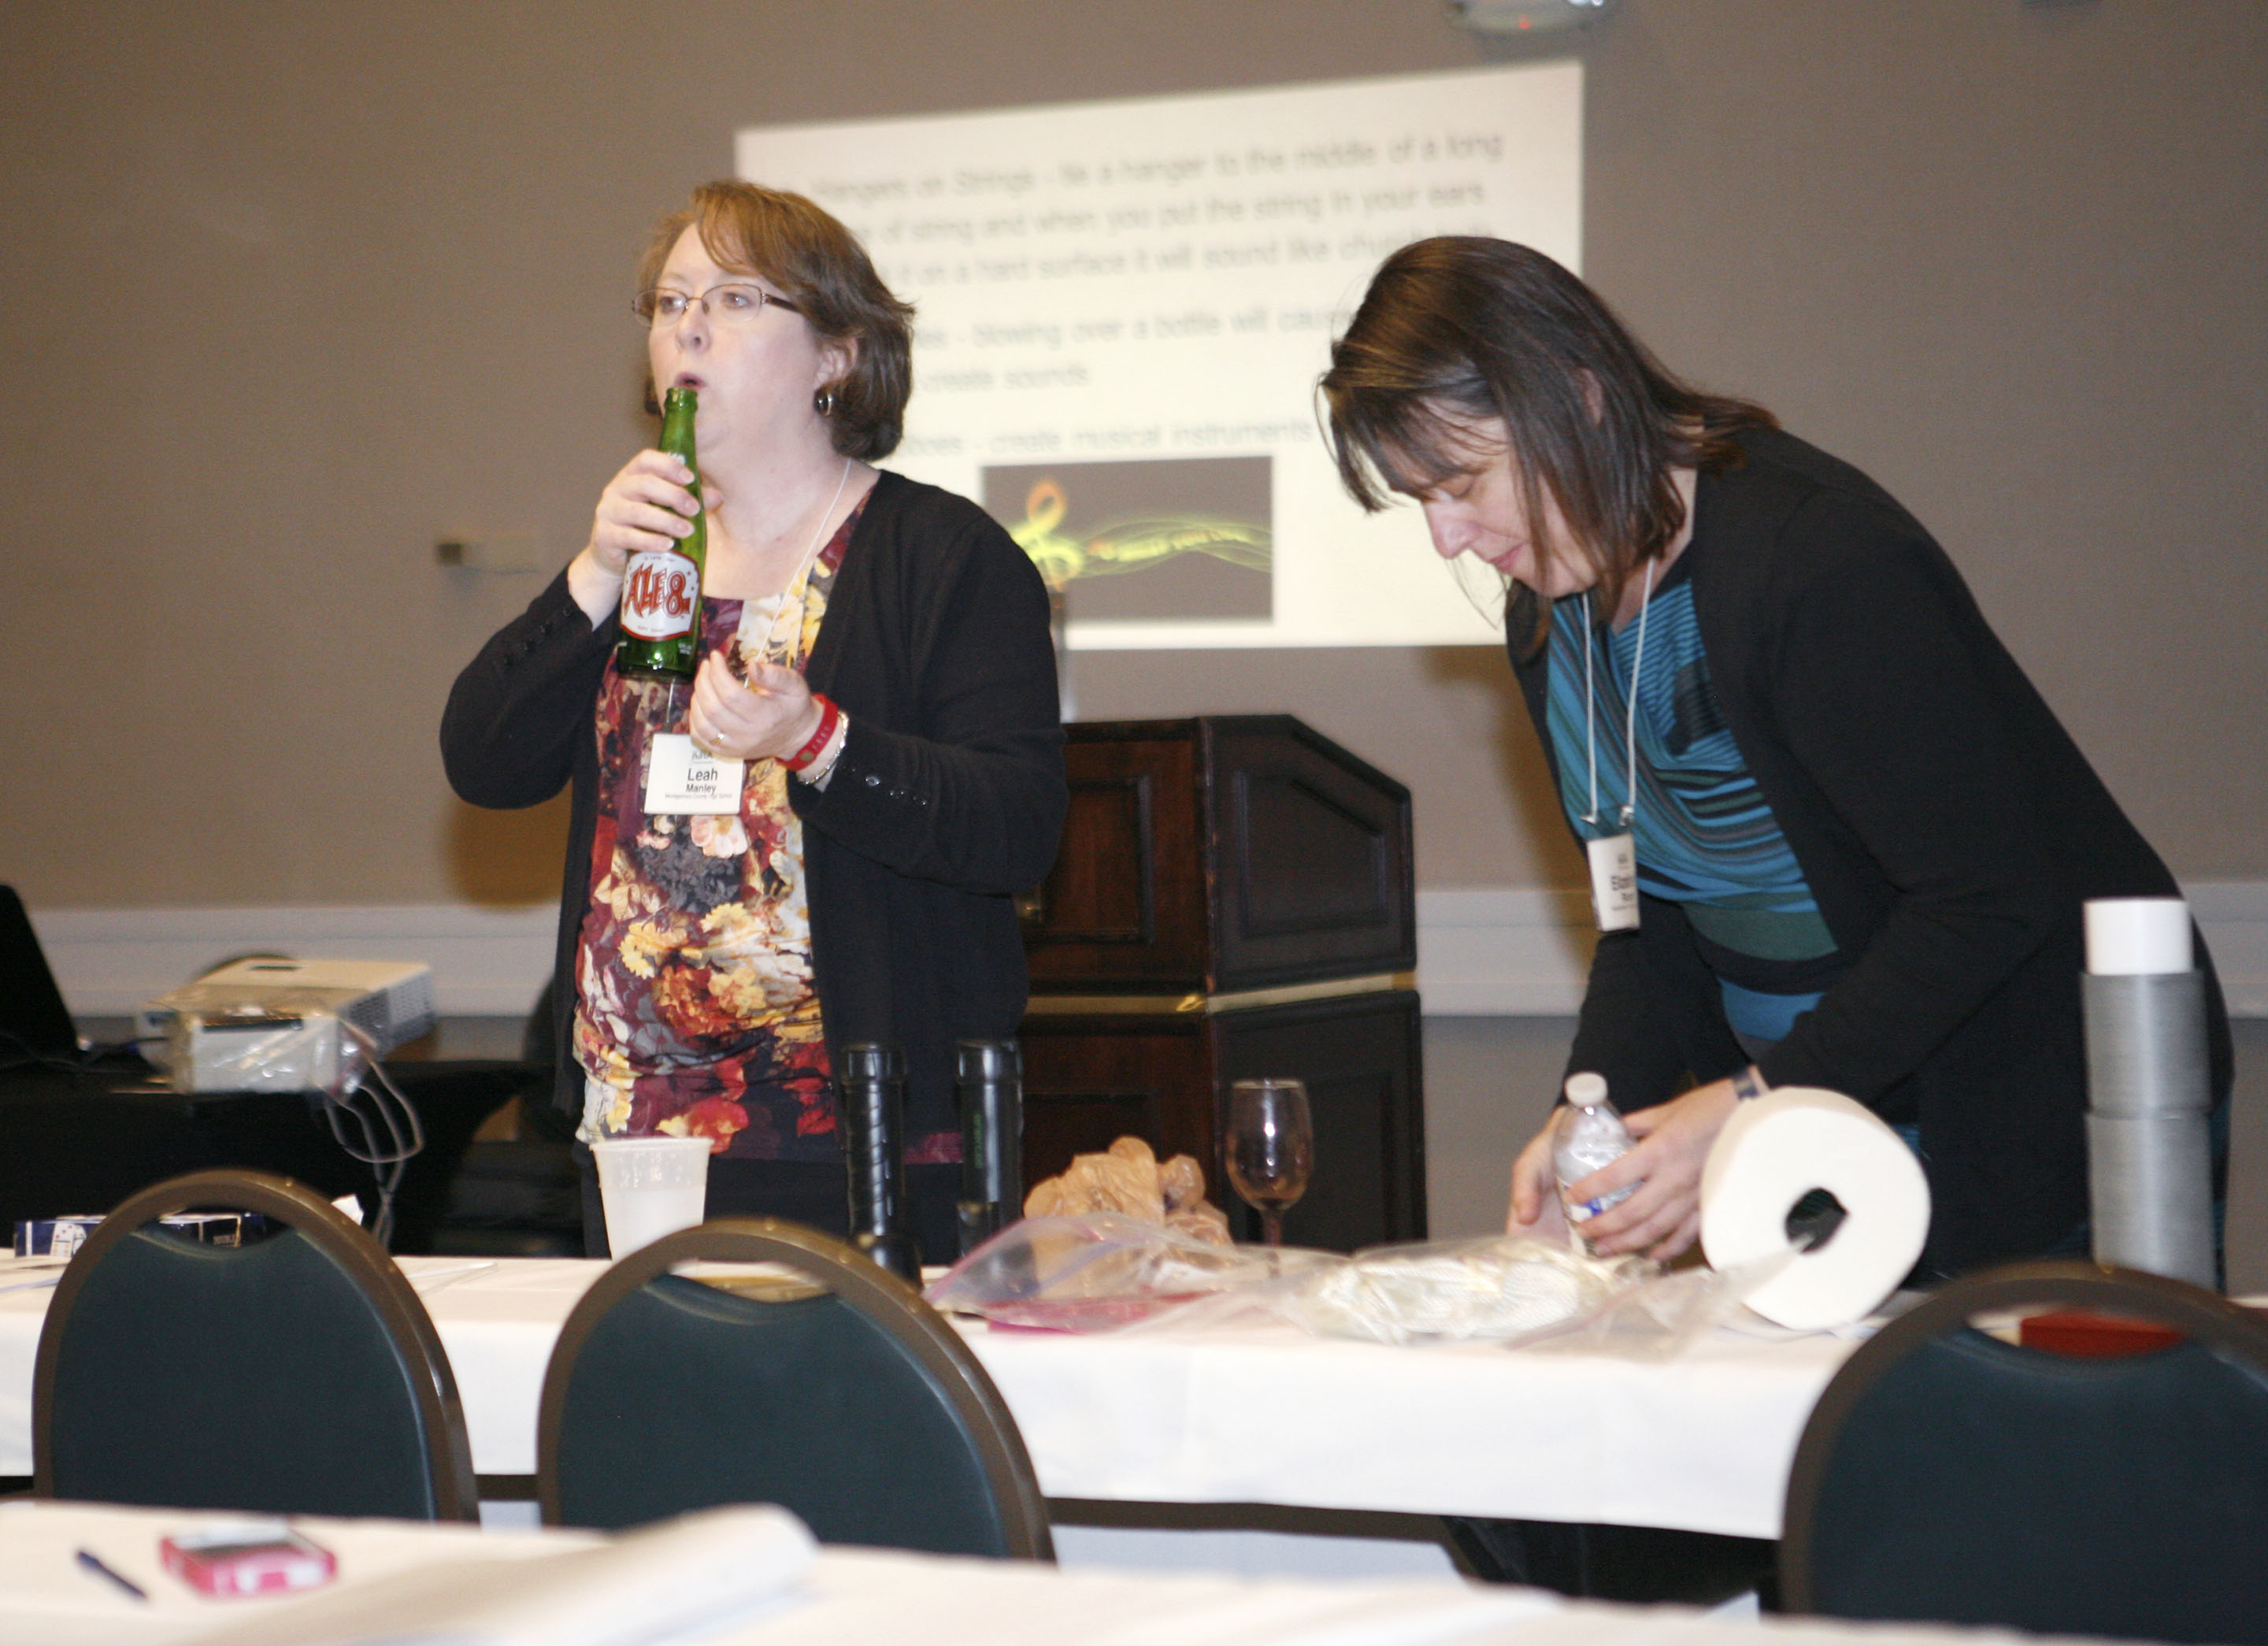 Leah Manley, left, produces sound from a soda bottle as Elizabeth Roland prepares another demonstration during a session on the Next Generation Science Standards on waves at the Kentucky Science Teachers Association’s annual conference in Lexington. The two teachers at Montgomery County High School demonstrated activities for elementary, intermediate and middle school classrooms that they used to help teachers in their district teach the standards. Photo by Mike Marsee, Nov. 6, 2015